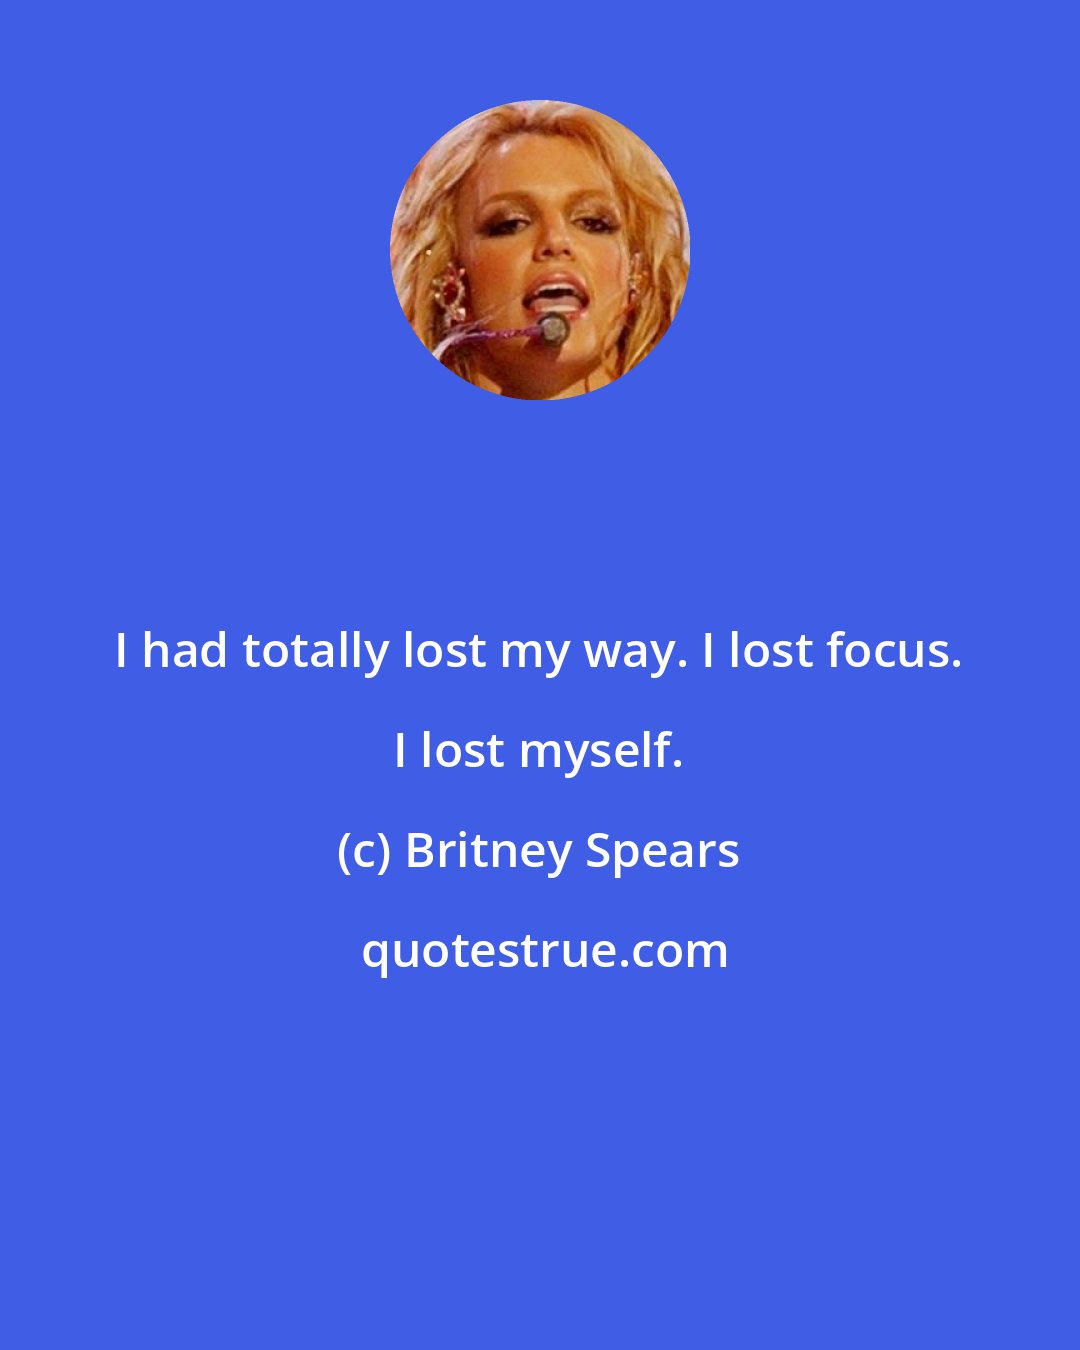 Britney Spears: I had totally lost my way. I lost focus. I lost myself.